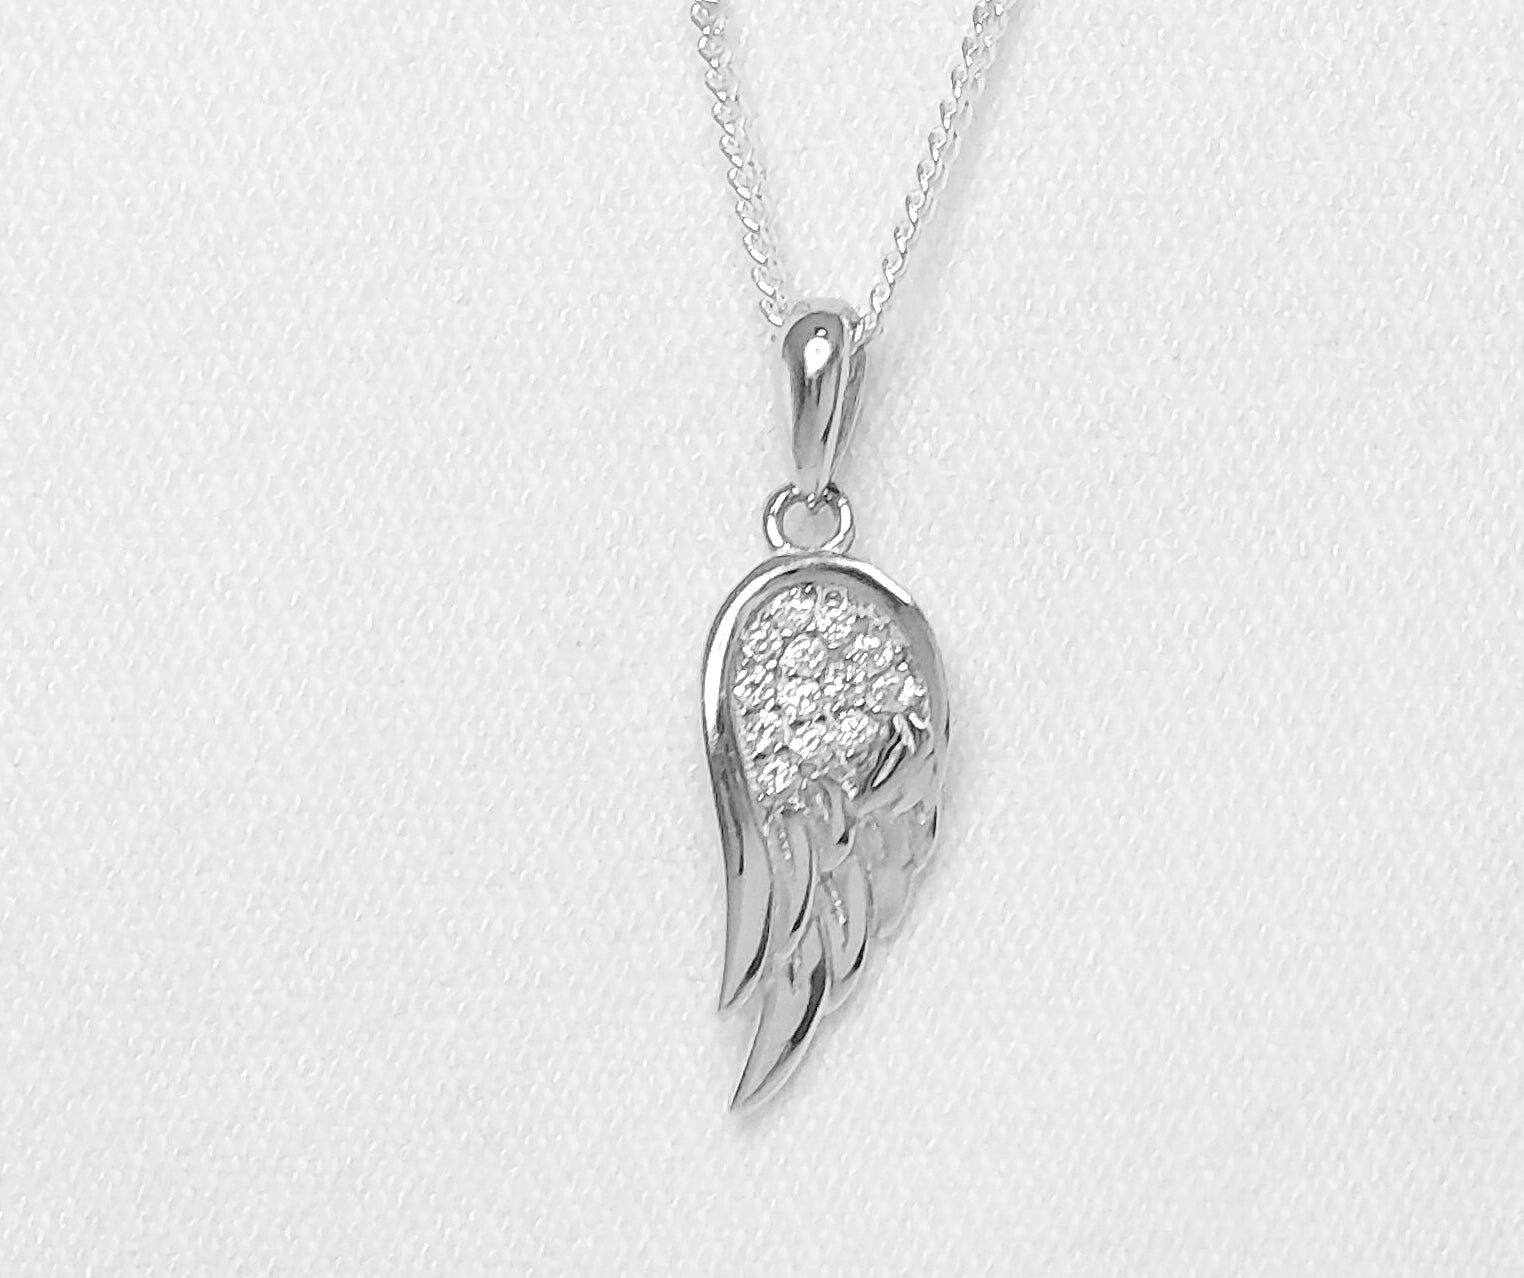 Sterling Silver Angel Wing Pendant with Cubic Zirconia Stones